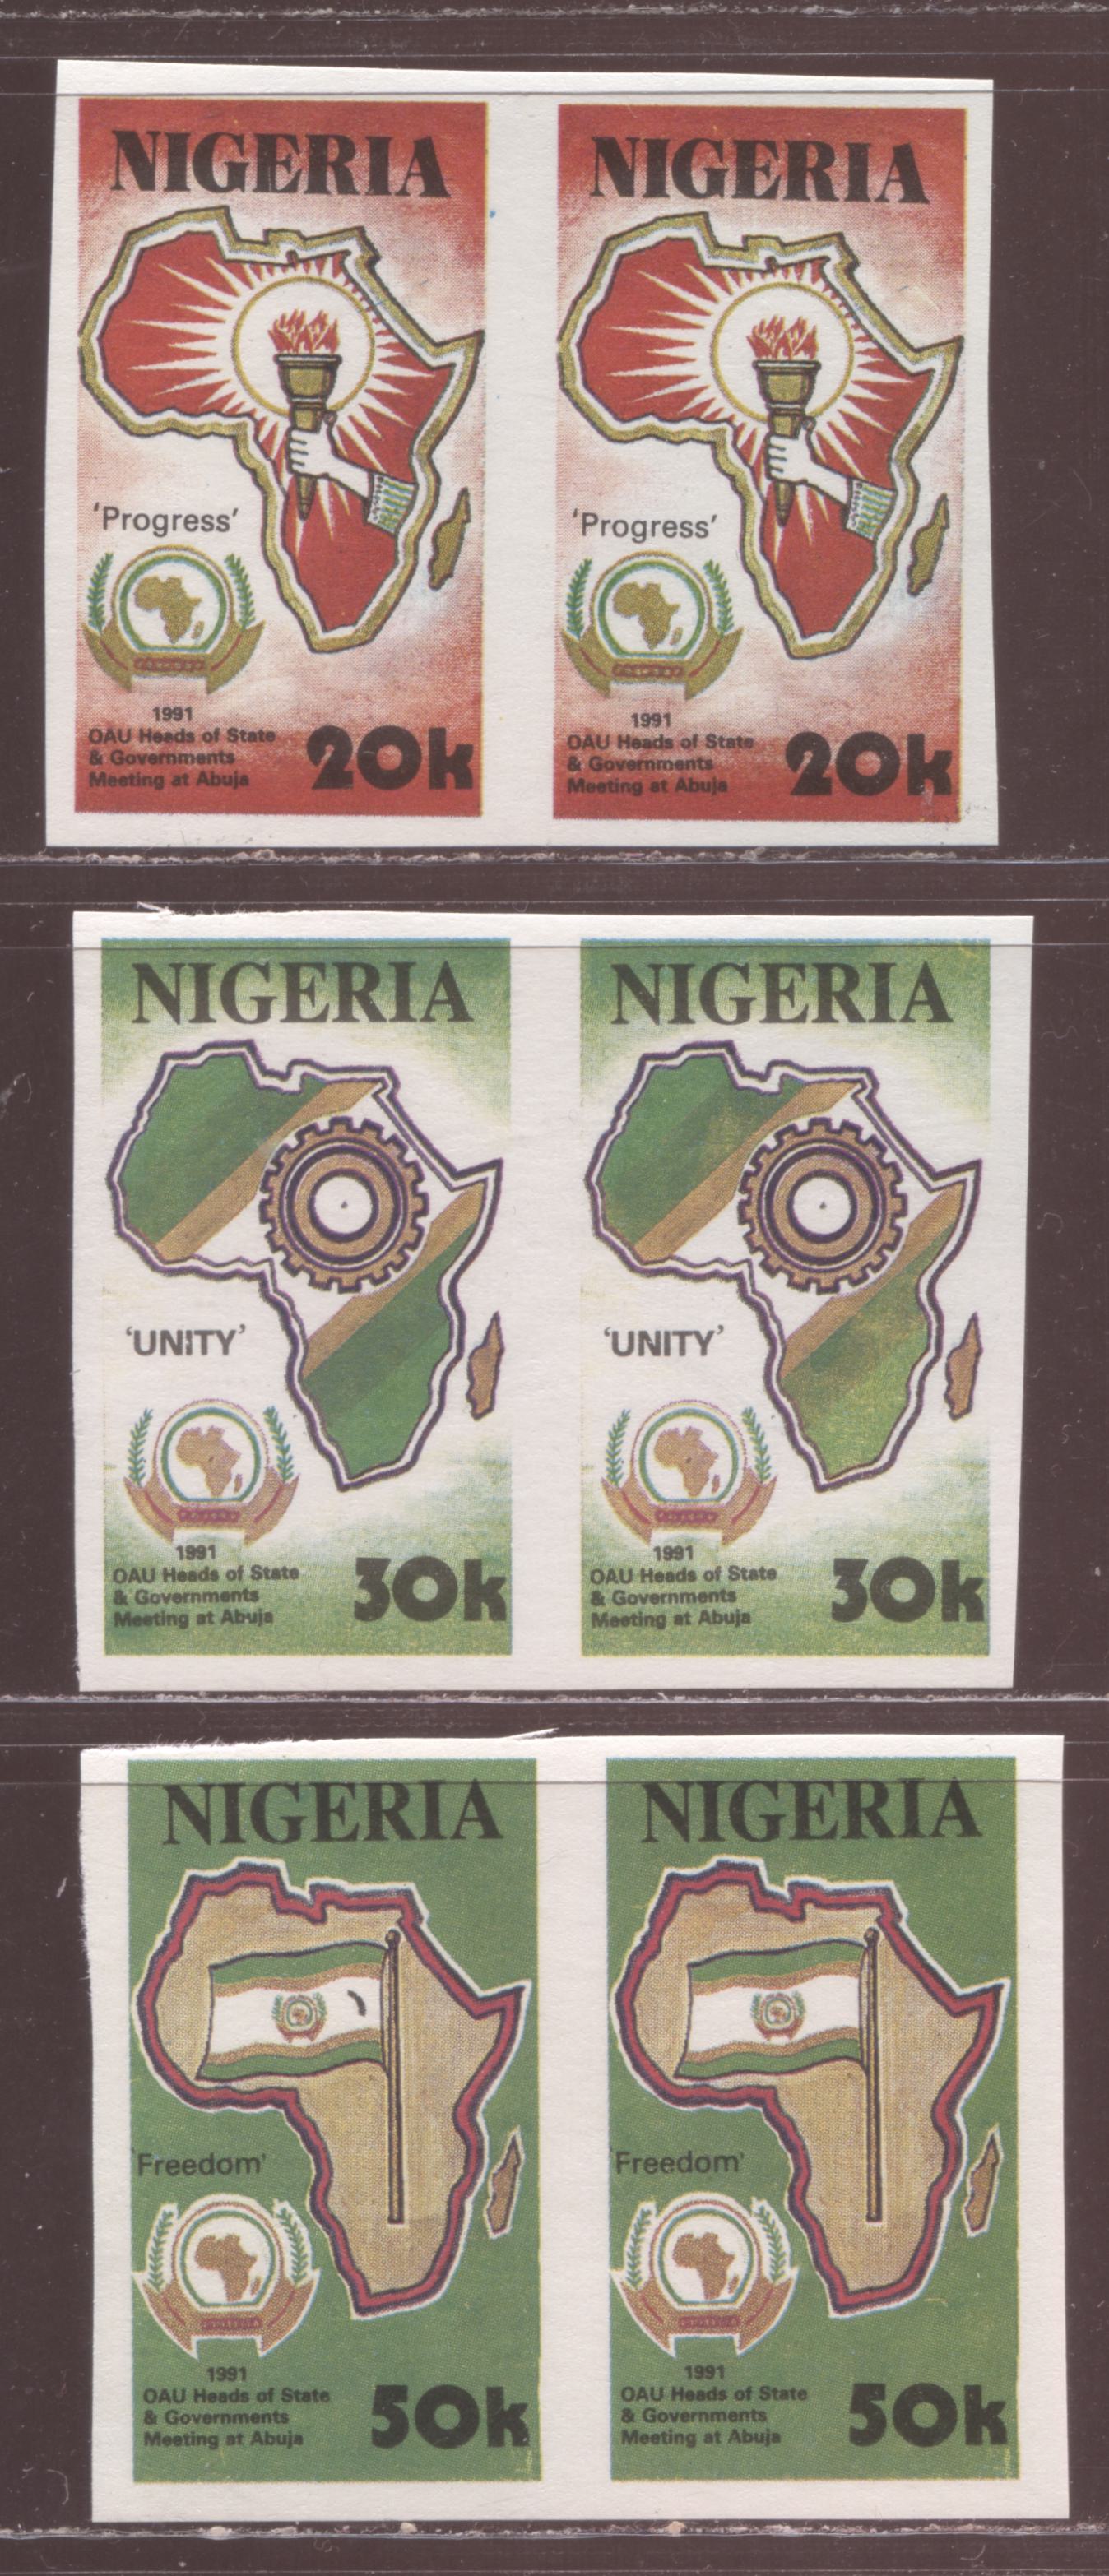 Nigeria SC#578-580 1991 OV4 Meeting, 3 VFNH Imperf Horizontal Pairs, Click on Listing to See ALL Pictures, Estimated Value $15 USD